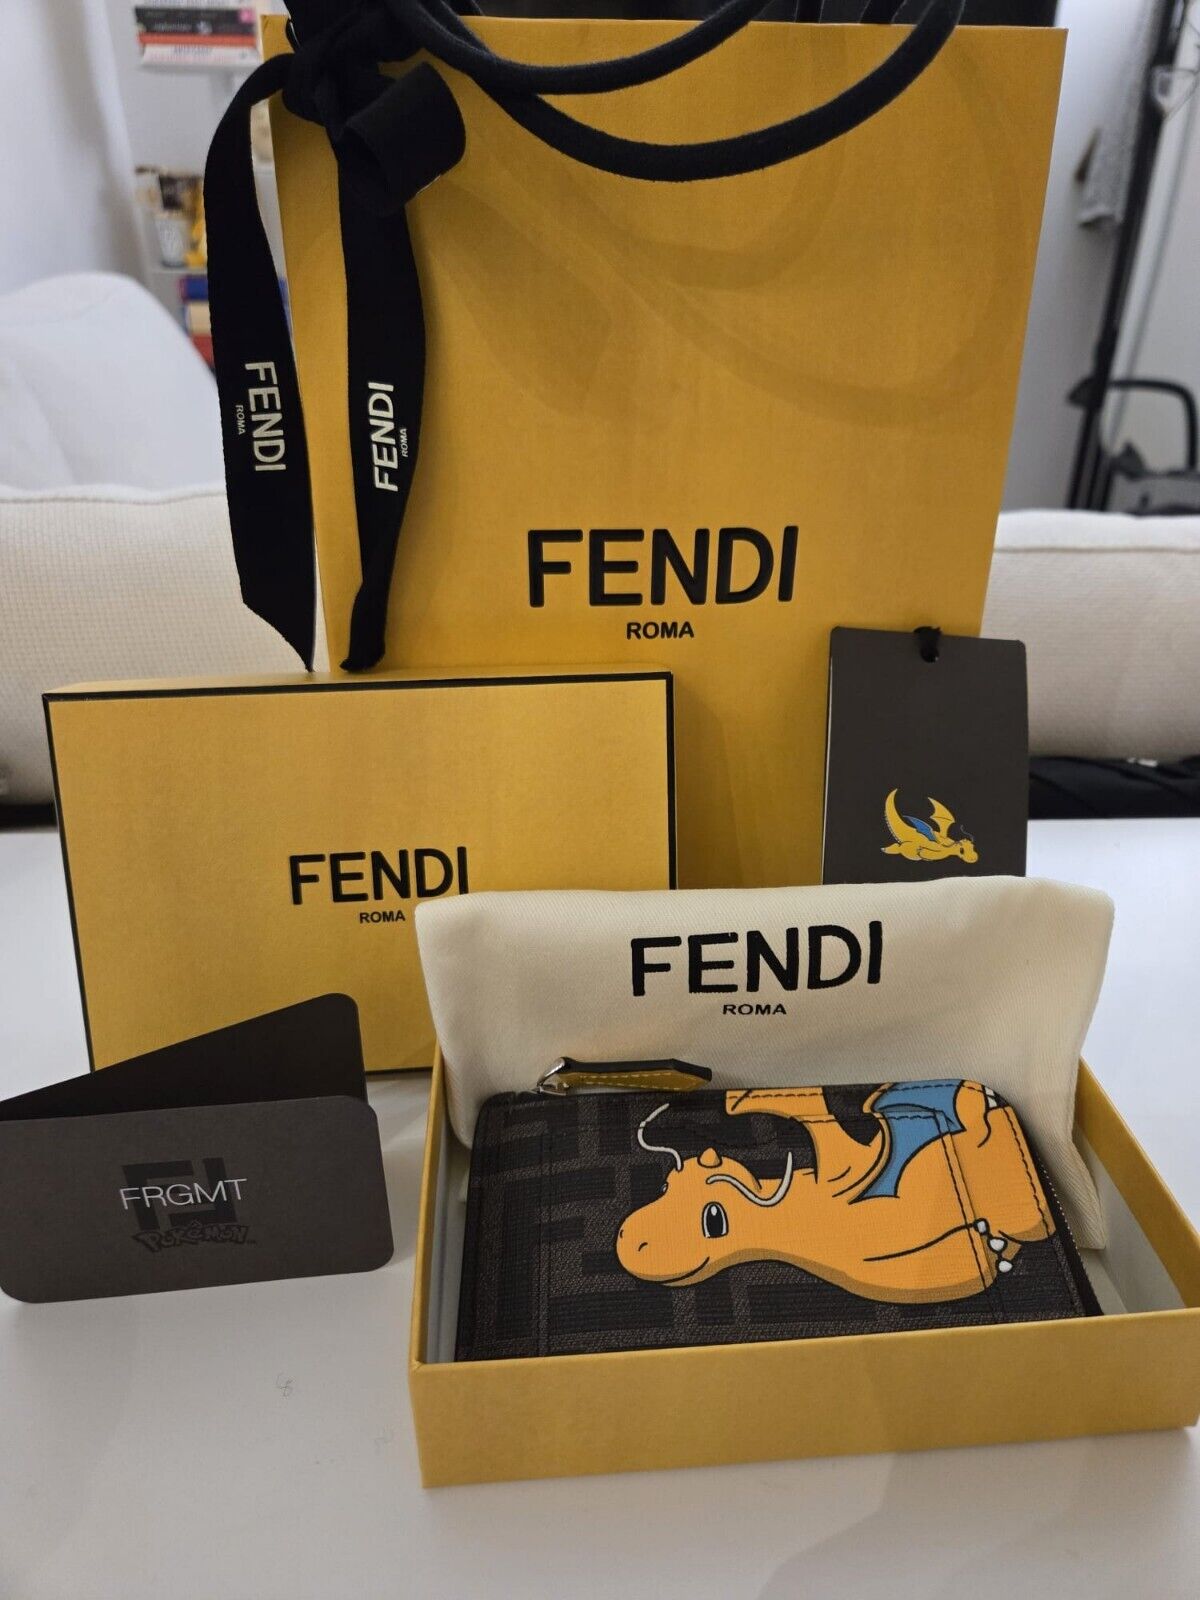 FENDI×FRGMT×POKEMON Card Case - Dragonite. New With Box, Bag And Tags